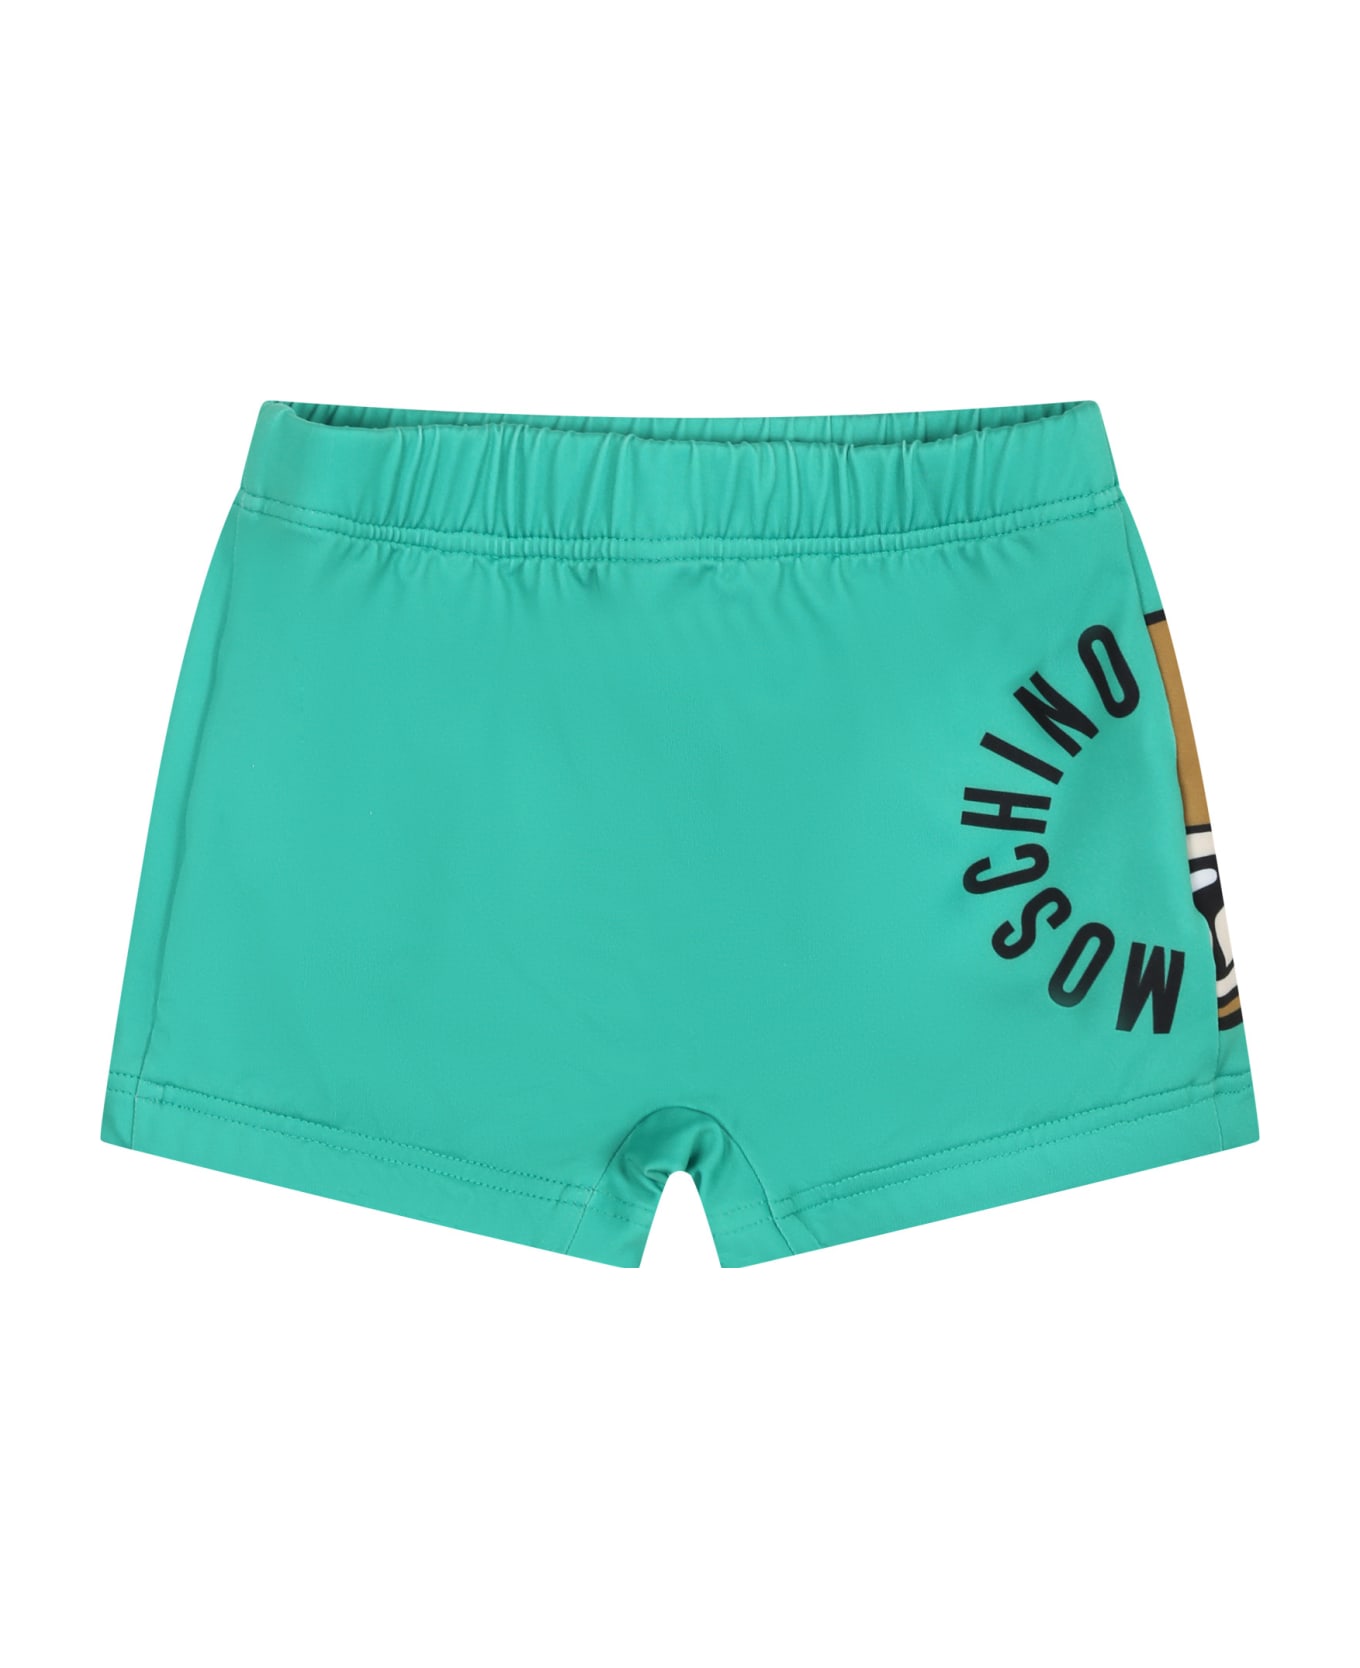 Moschino Green Swim Shorts For Baby Boy With Teddy Bear And Logo - Green 水着